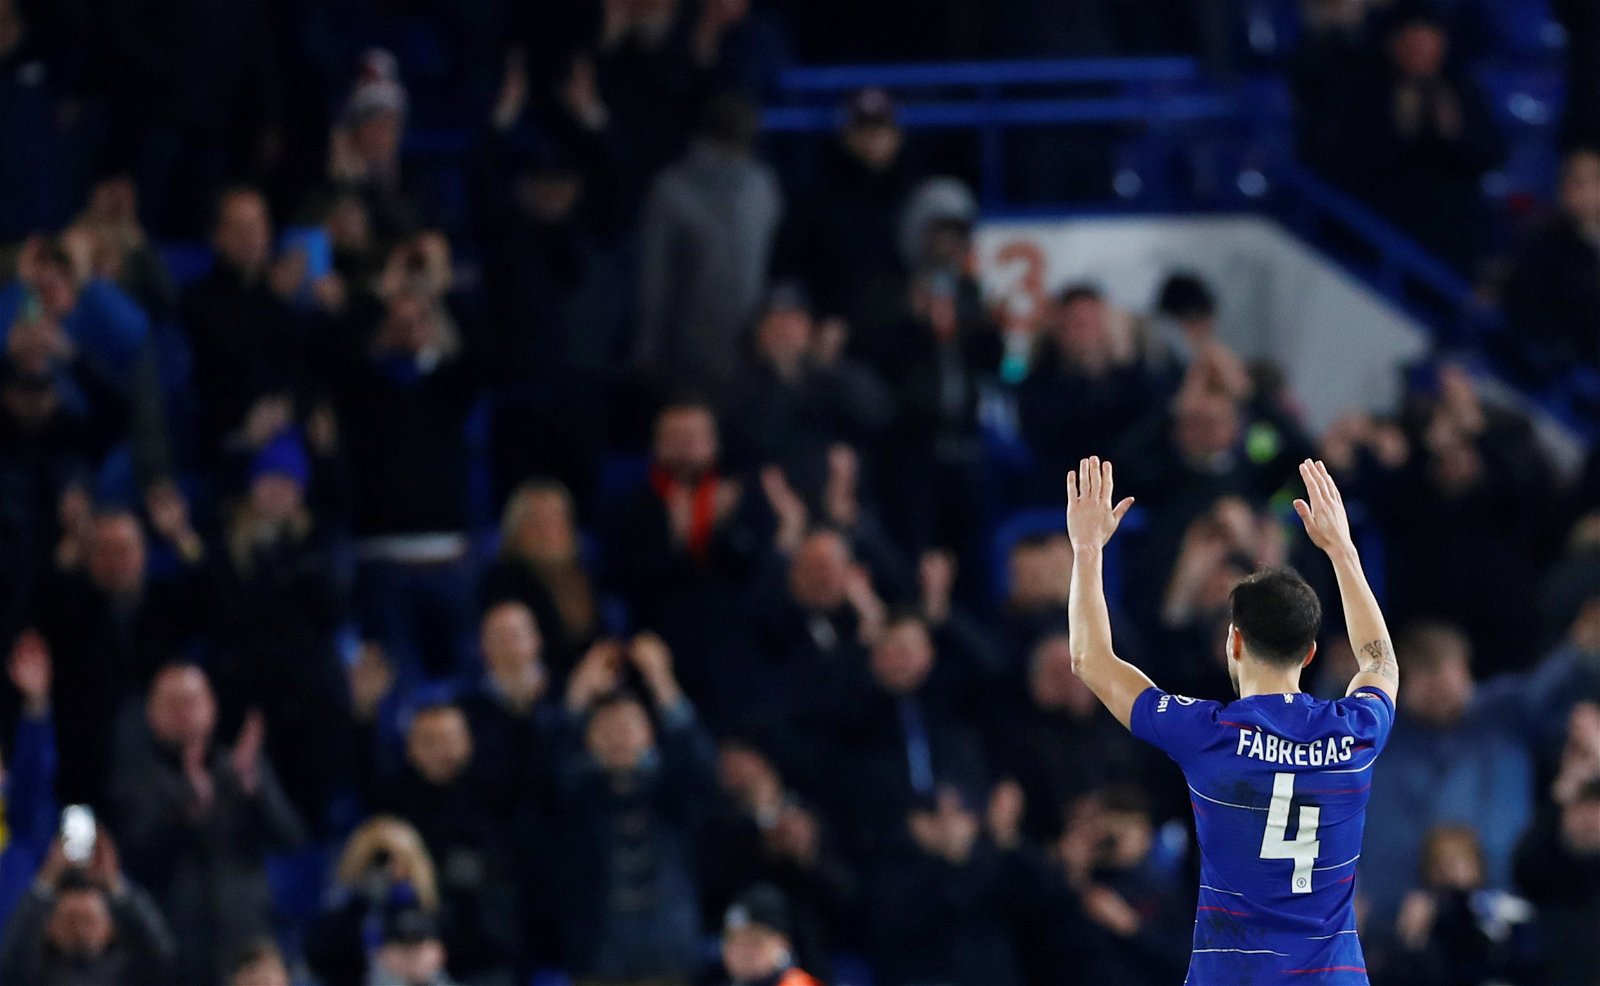 Fabregas is one of a kind: Cudicini